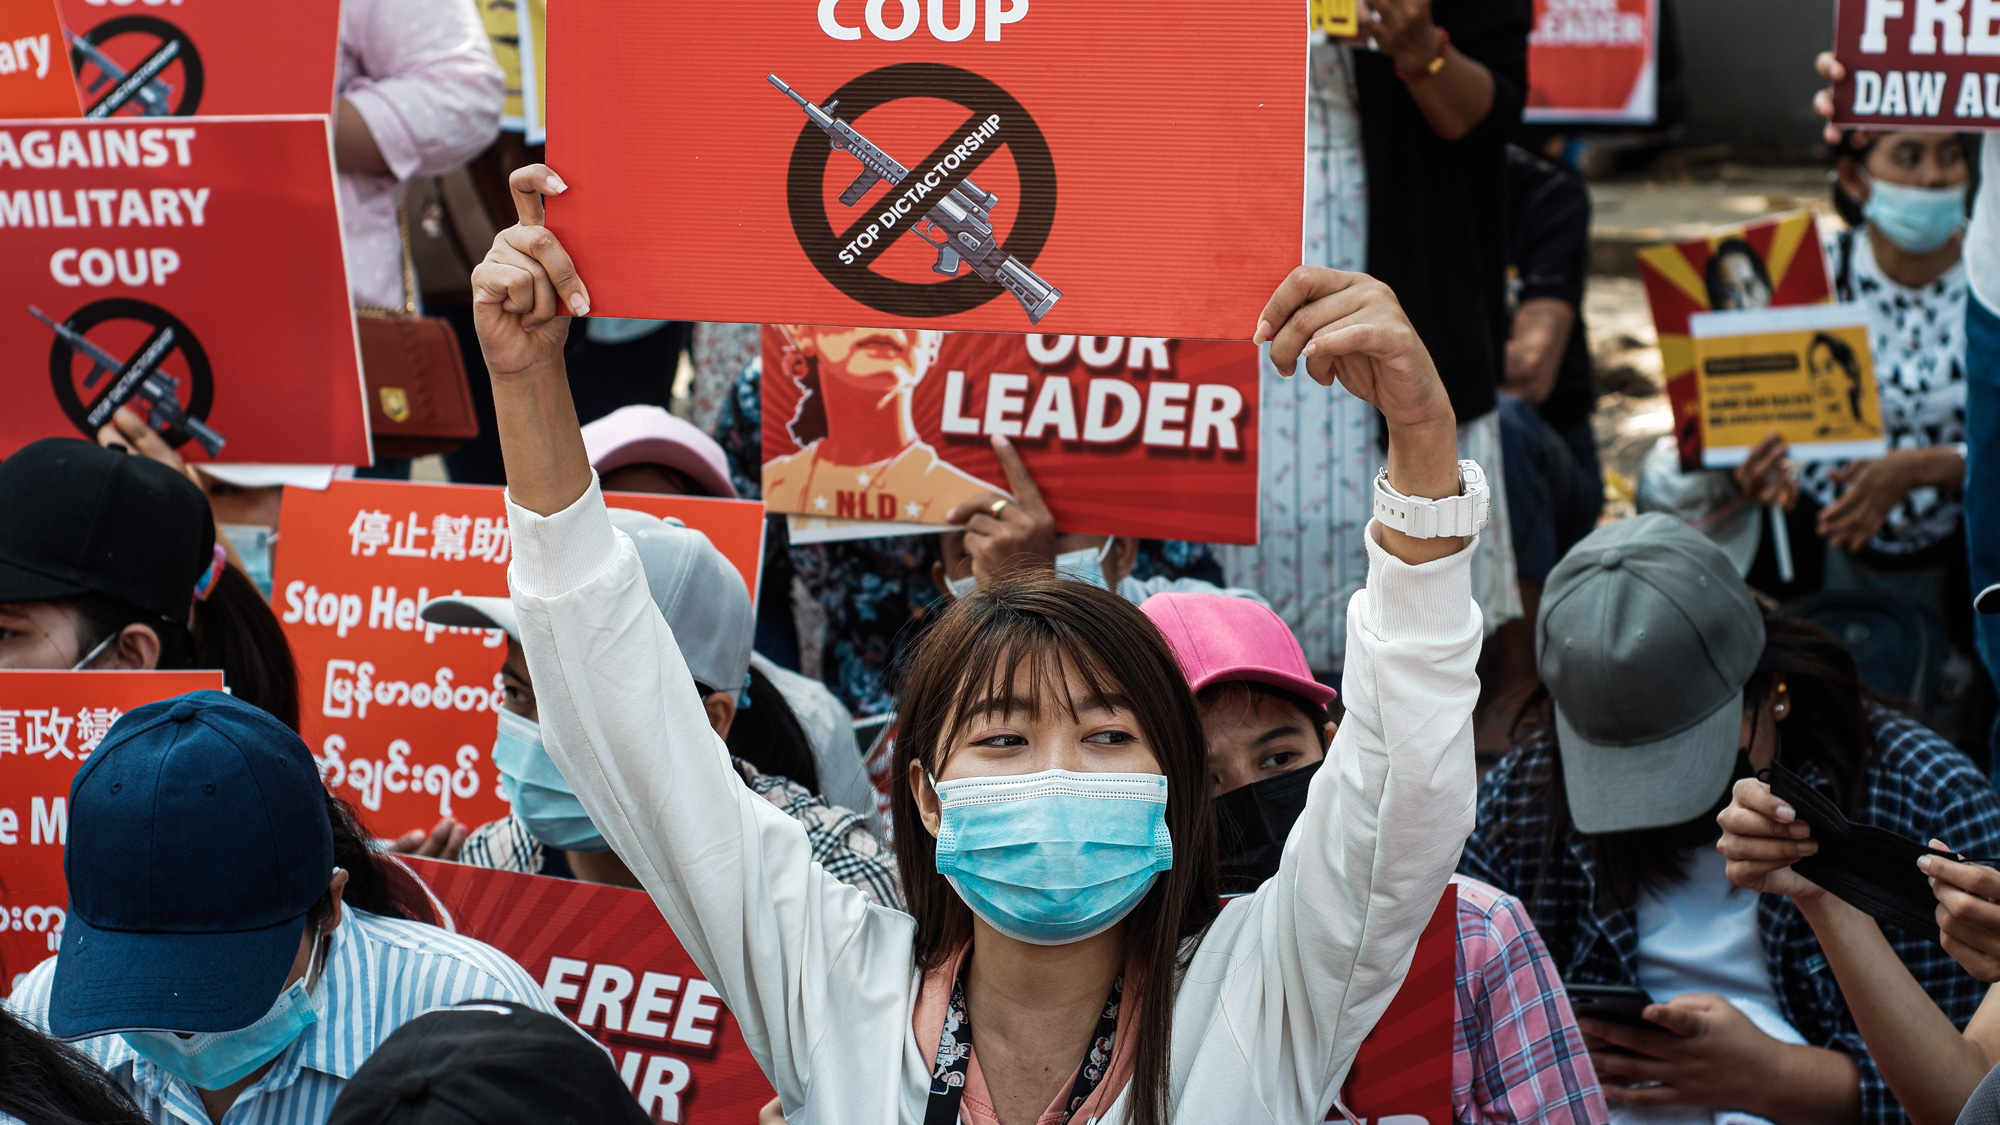 Protest in Myanmar against Military Coup 14-Feb-2021